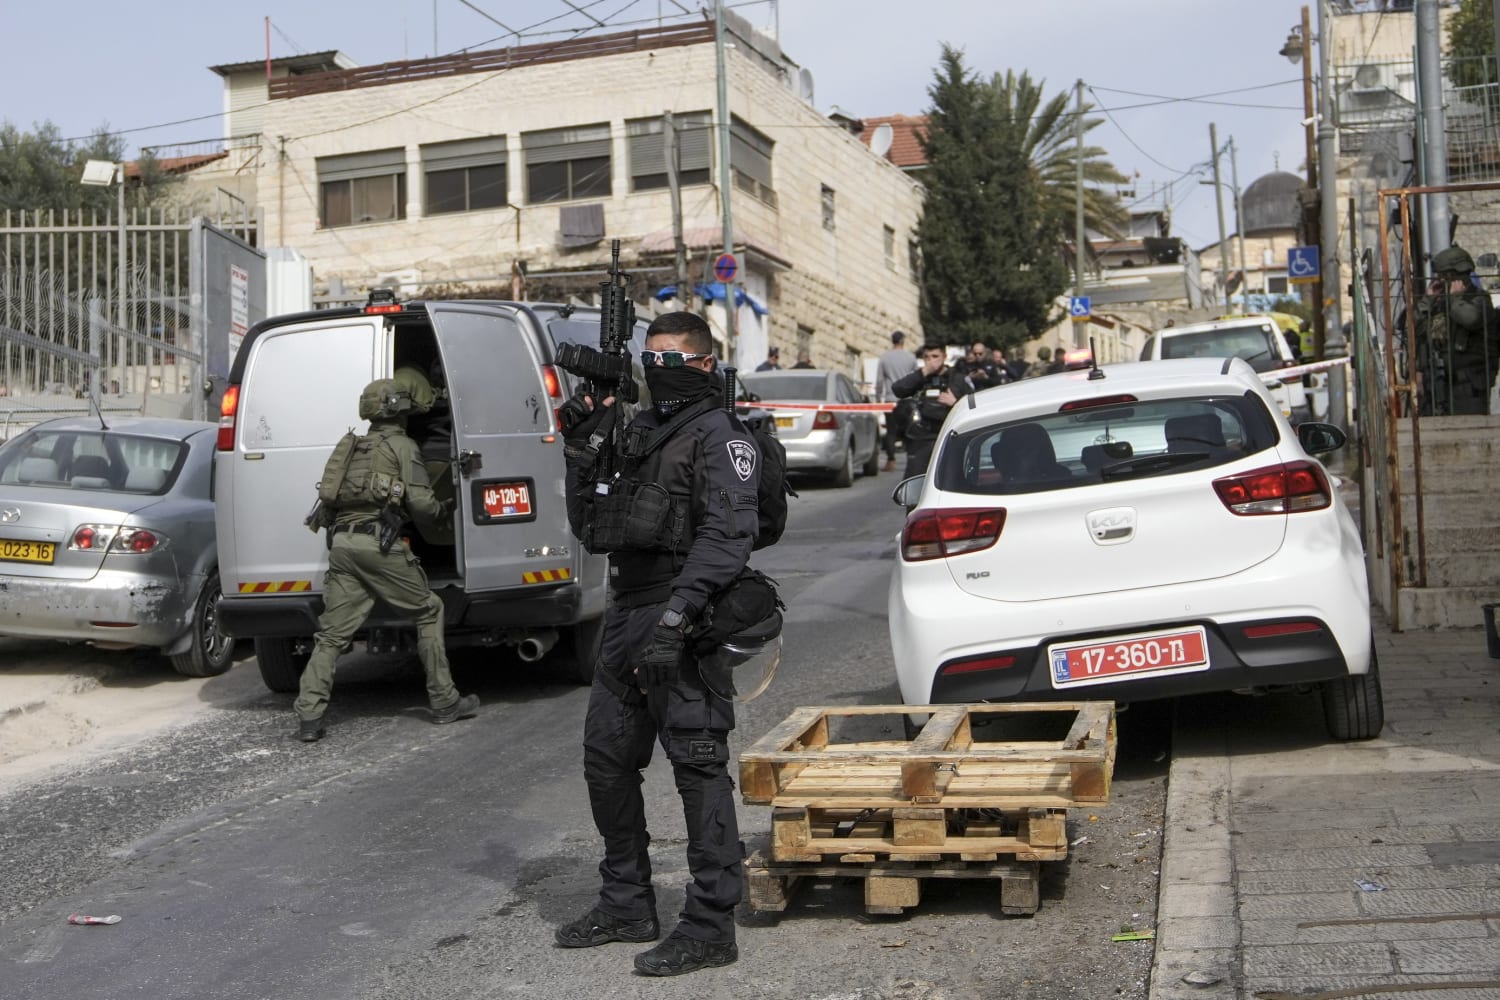 Palestinian gunman wounds 2 in Jerusalem, a day after 7 were killed